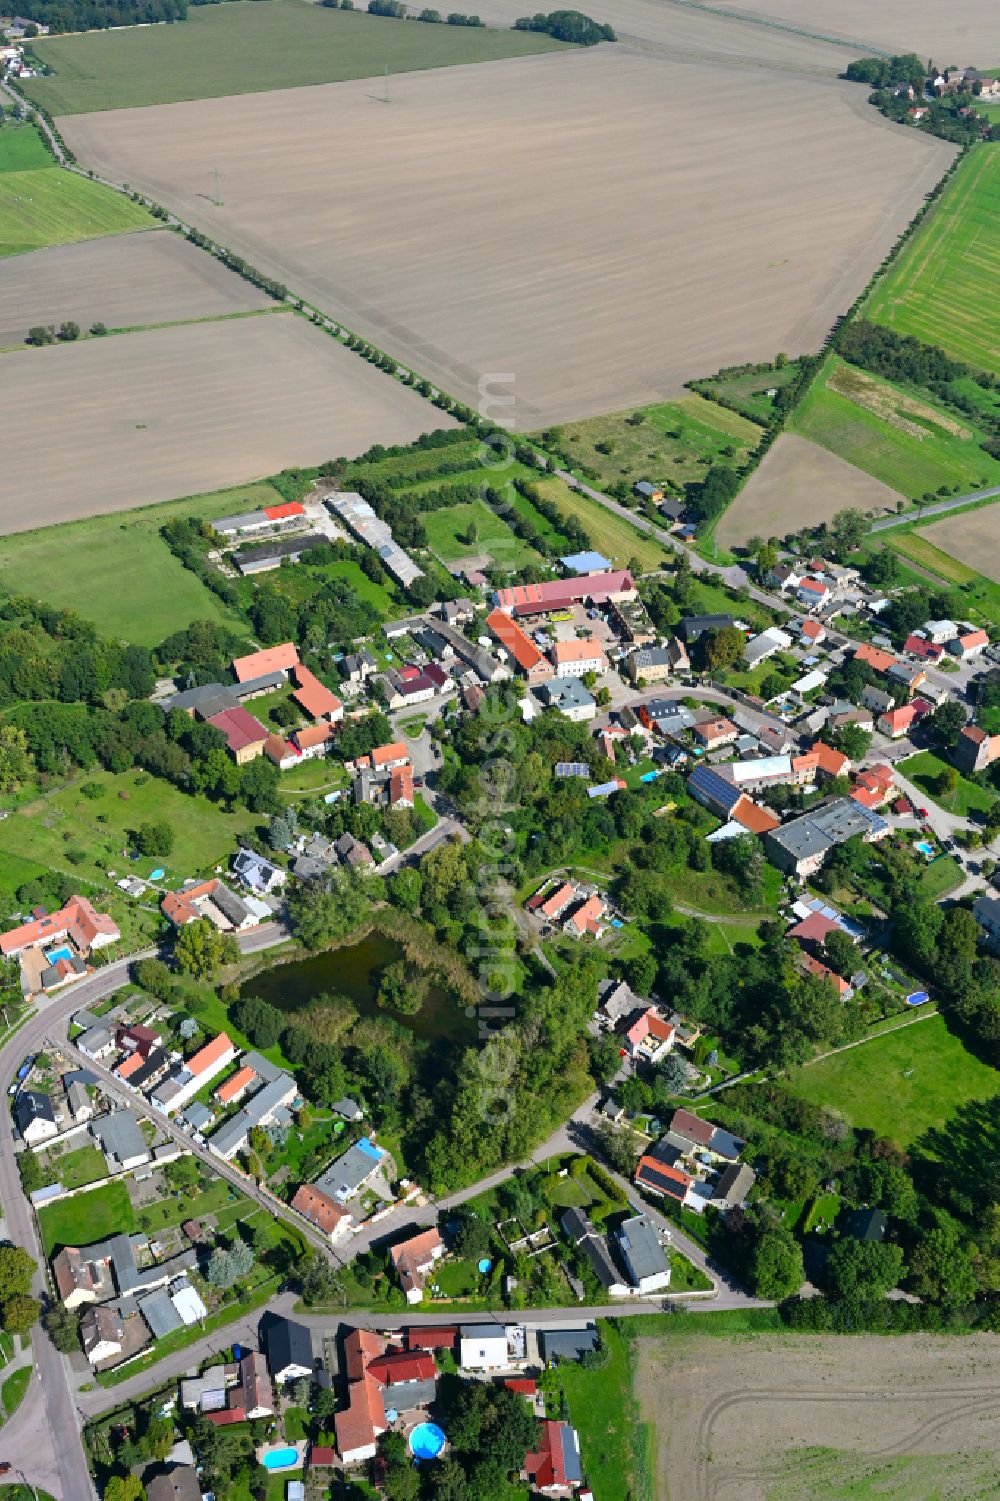 Aerial photograph Schwerz - Village - view on the edge of forested areas in Schwerz in the state Saxony-Anhalt, Germany